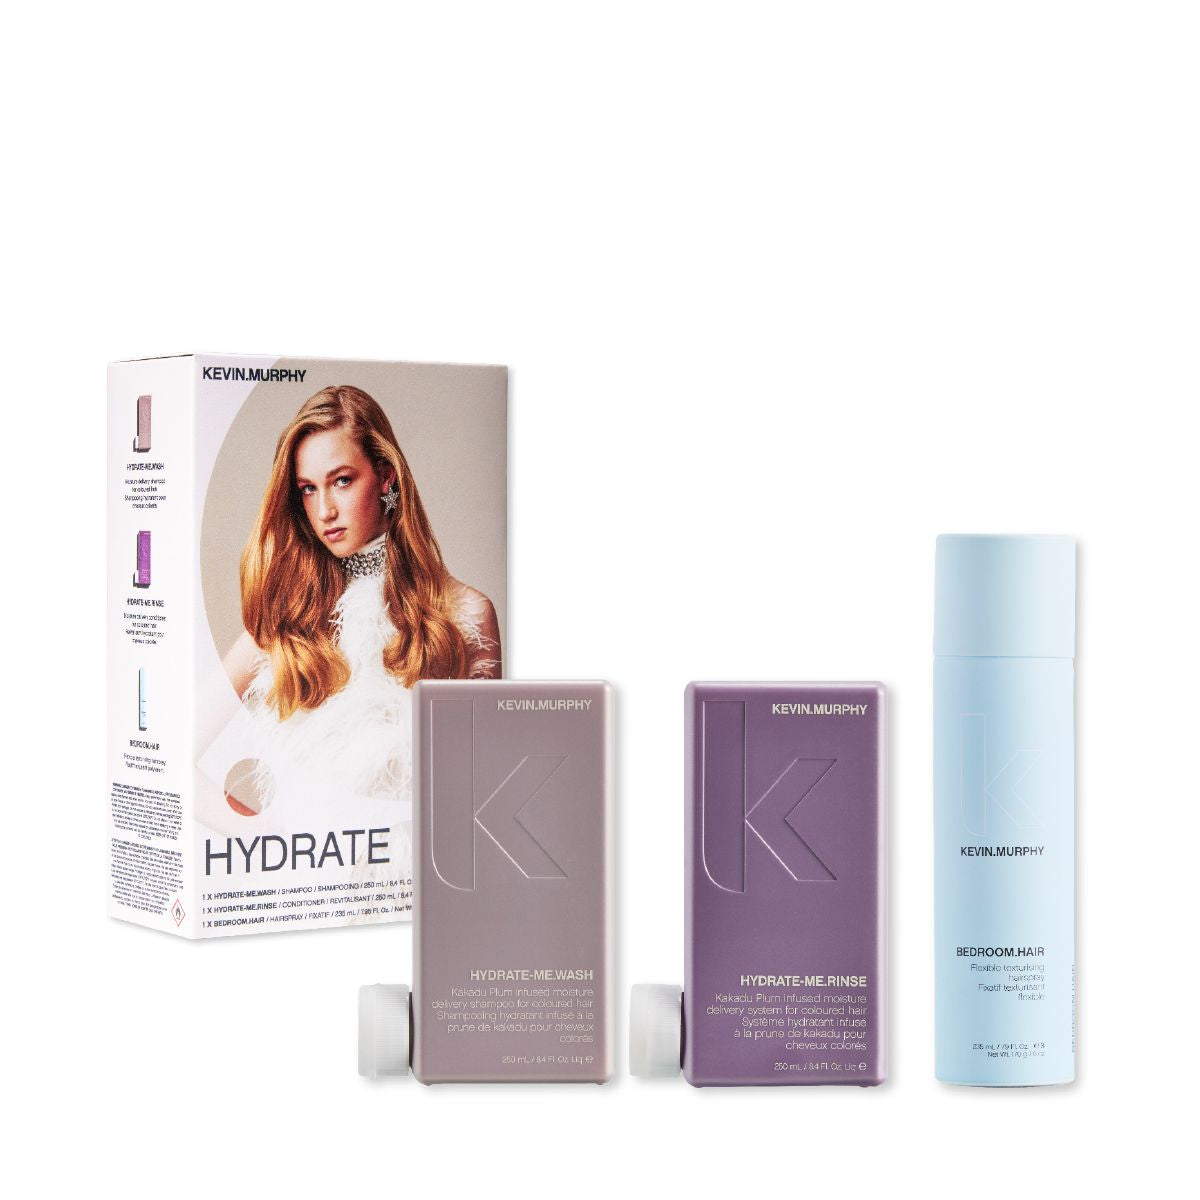 KEVIN.MURPHY HYDRATE – HYDRATE.ME